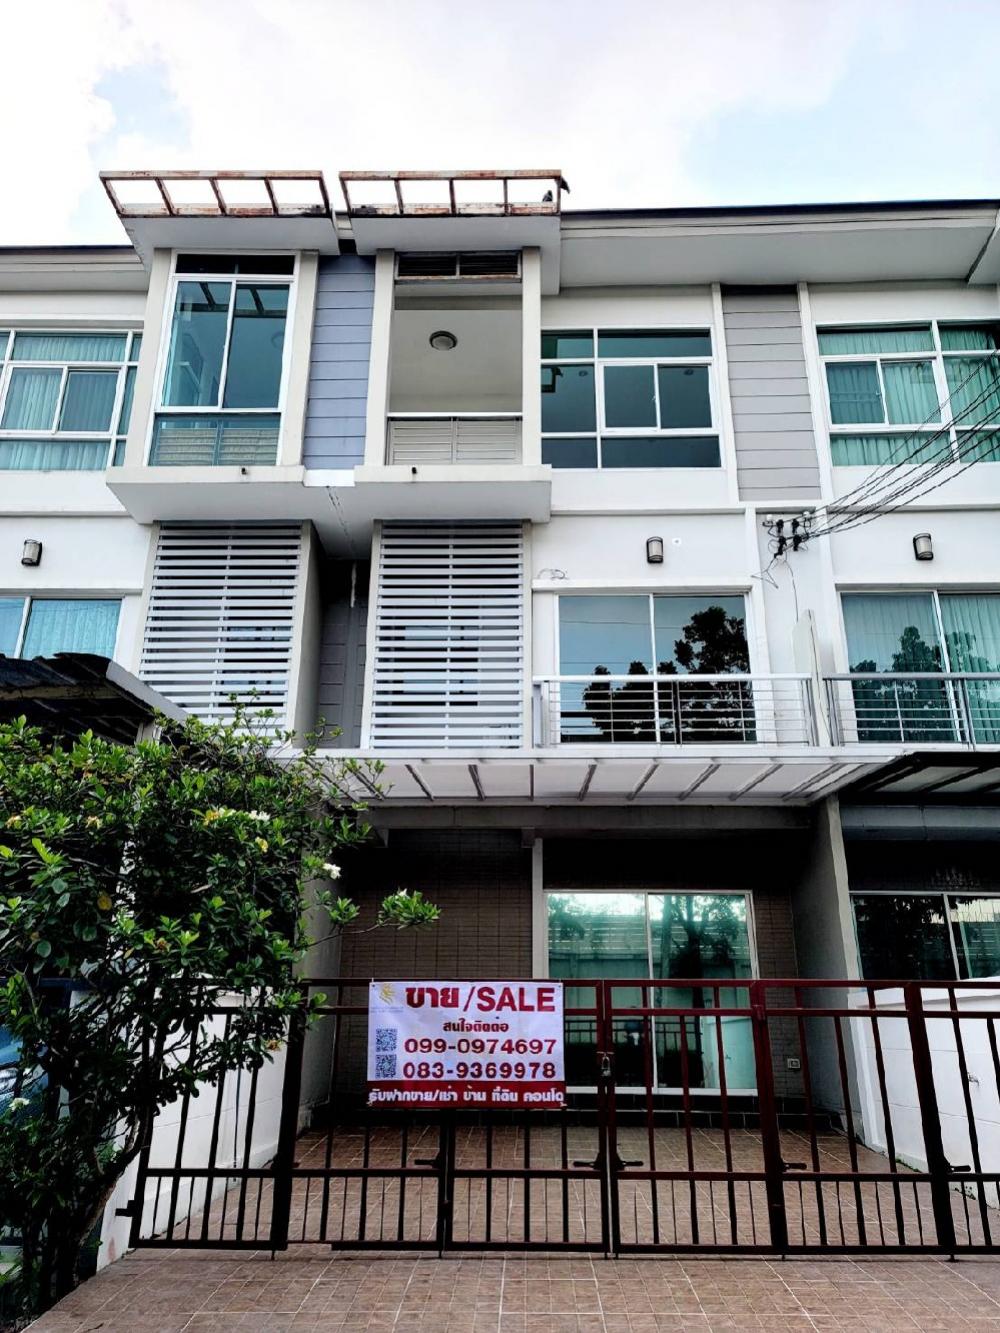 For SaleTownhouseLadkrabang, Suwannaphum Airport : 📣 Urgent sale!!️ 3 storey townhome The Metro-Rama 9 🏢 next to Stamford University, good location, near Huamark Airport Link 🚉 ready to move in, price only 4.49 million baht!!️